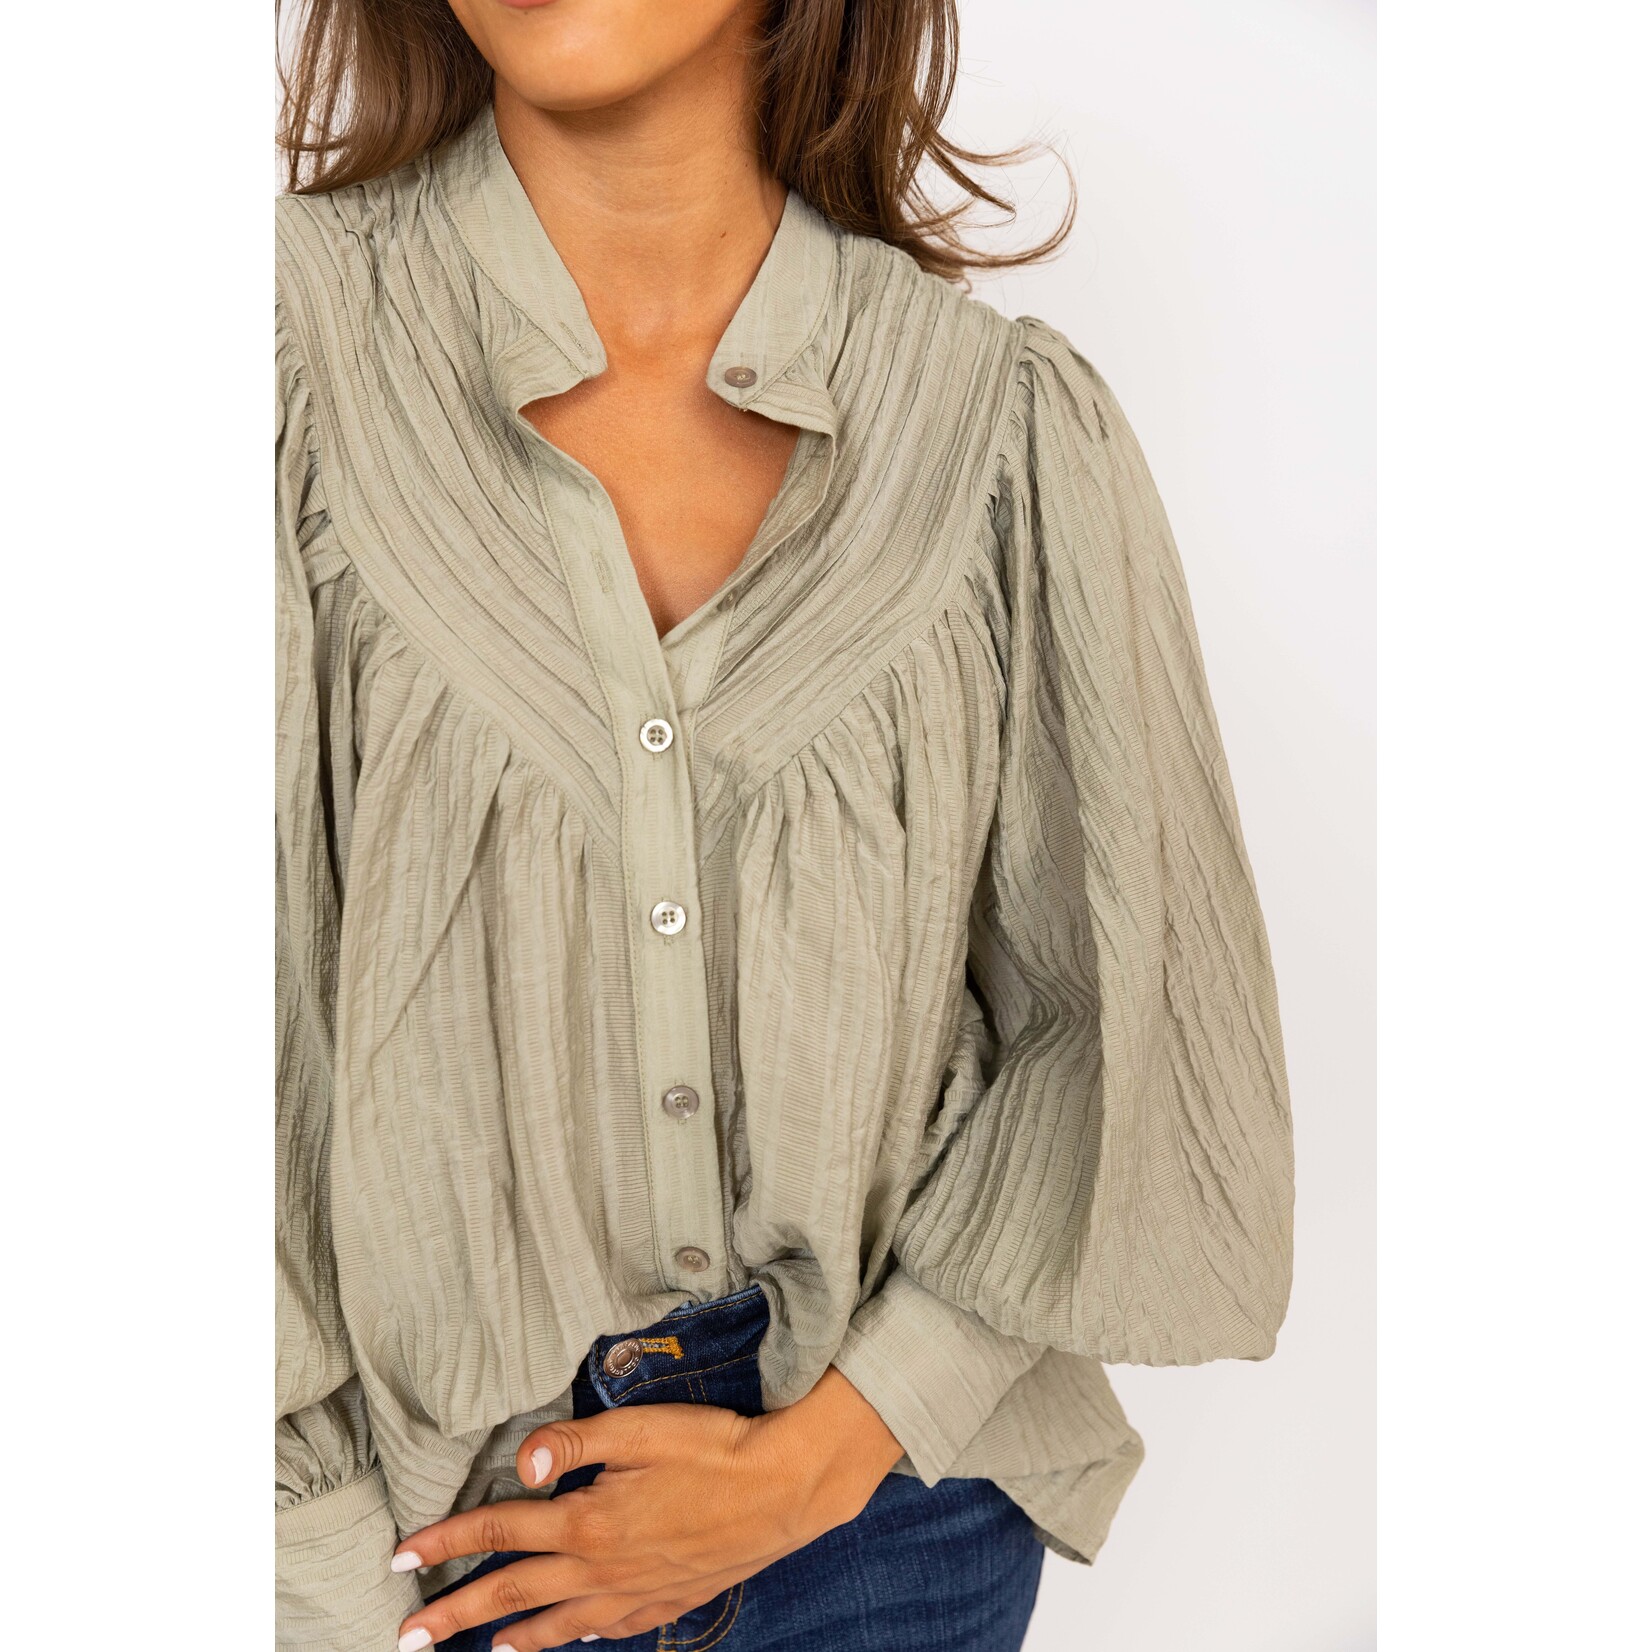 Solid Pleat Button Top